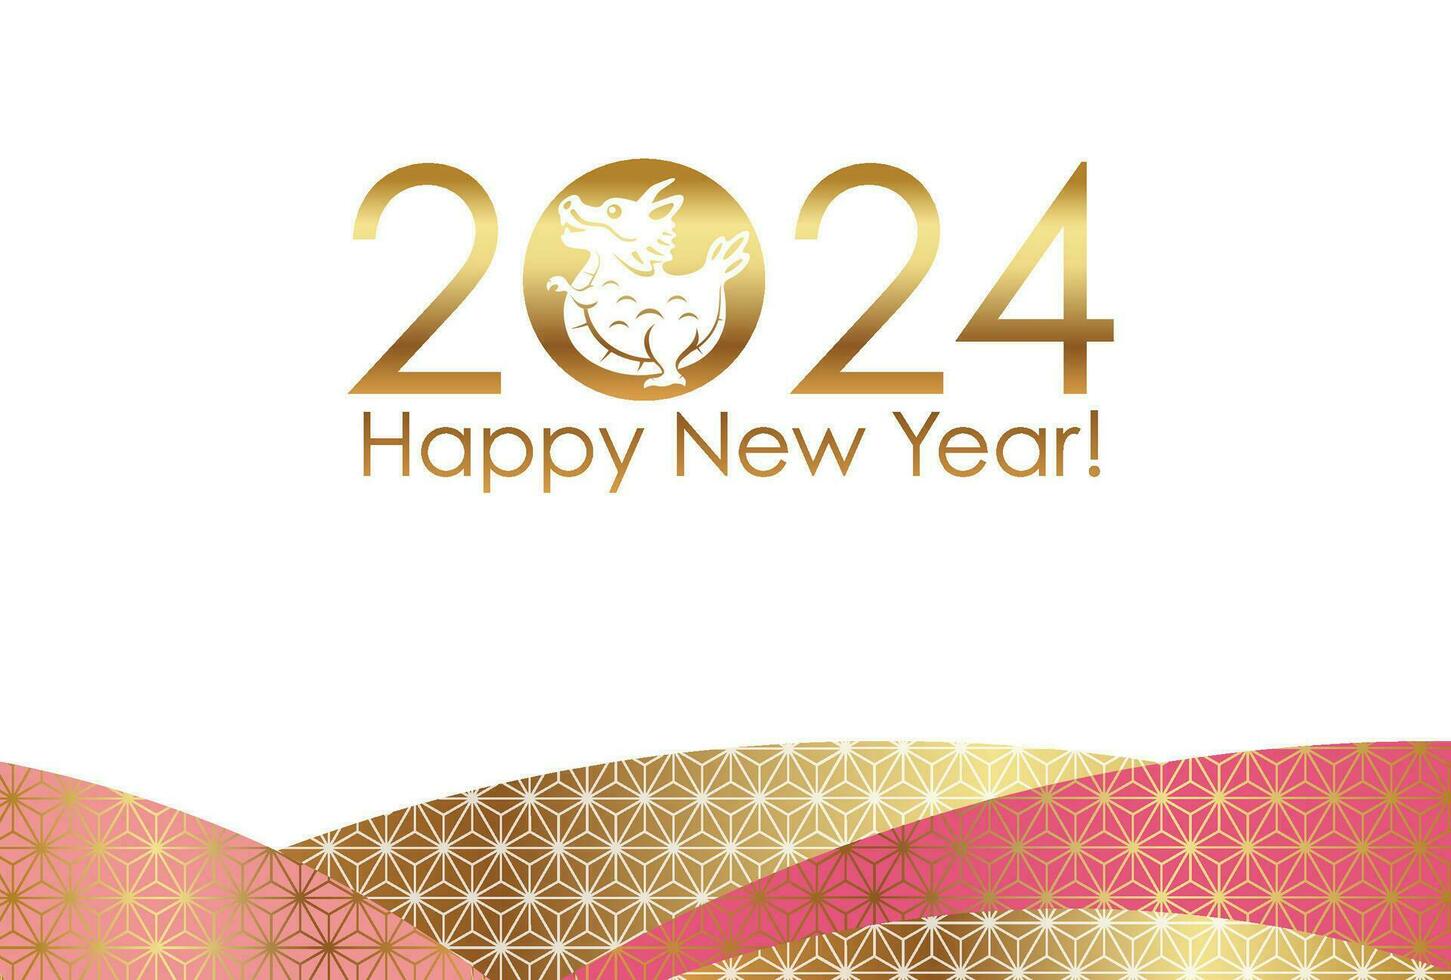 The Year 2024, Year Of The Dragon, Greeting Card Template With Japanese Vintage Patterns. vector